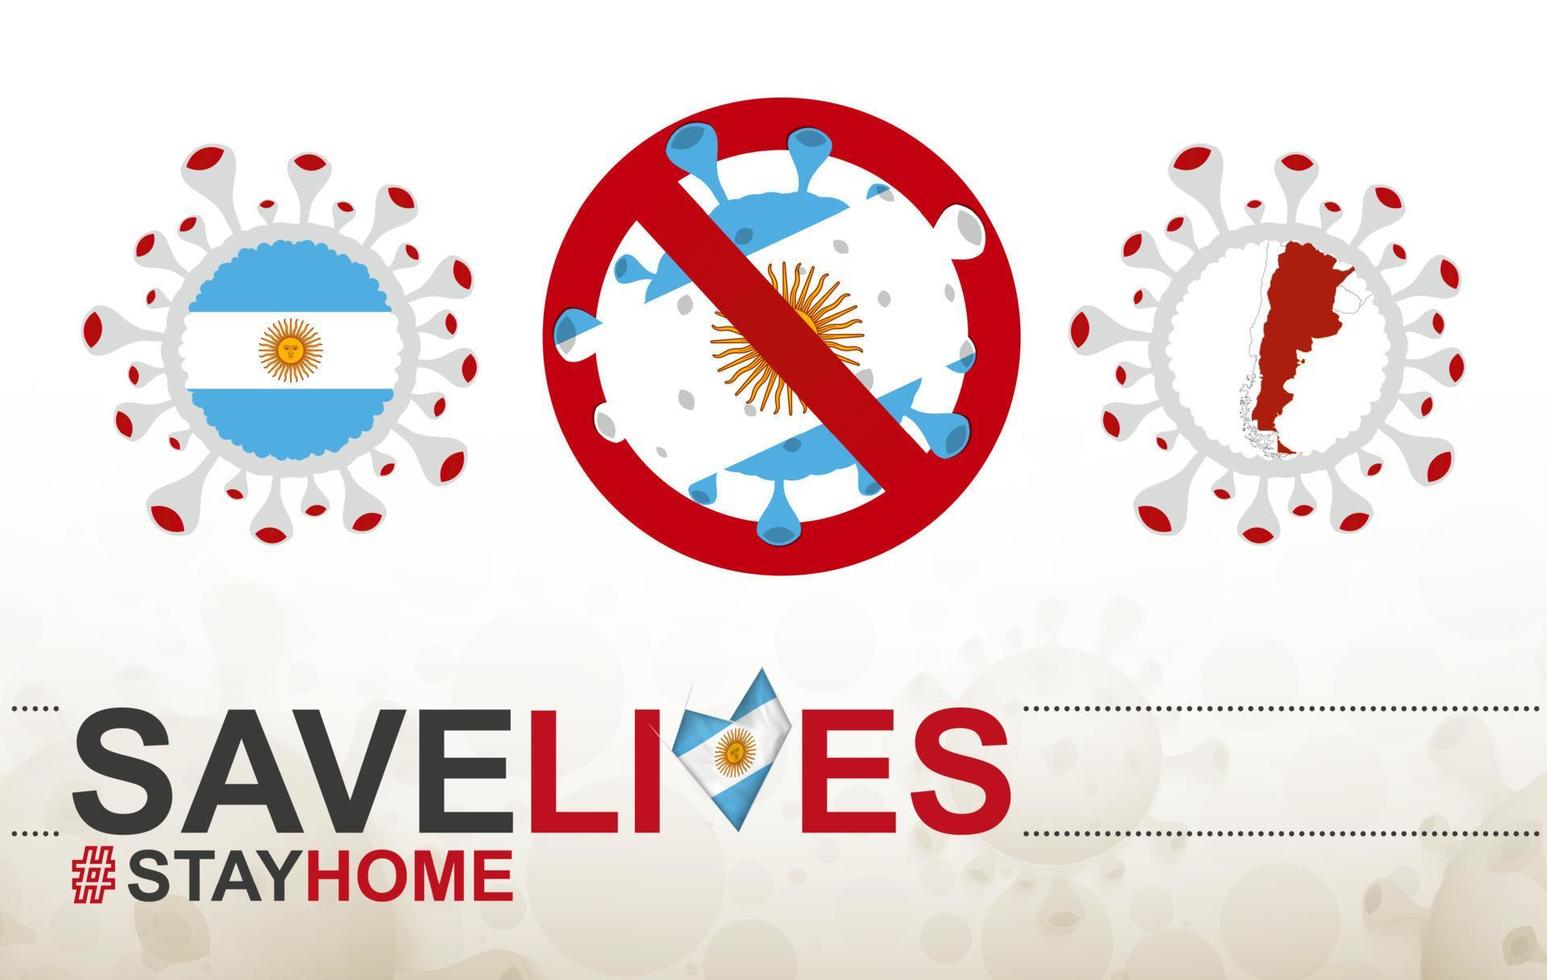 Coronavirus cell with Argentina flag and map. Stop COVID-19 sign, slogan save lives stay home with flag of Argentina vector